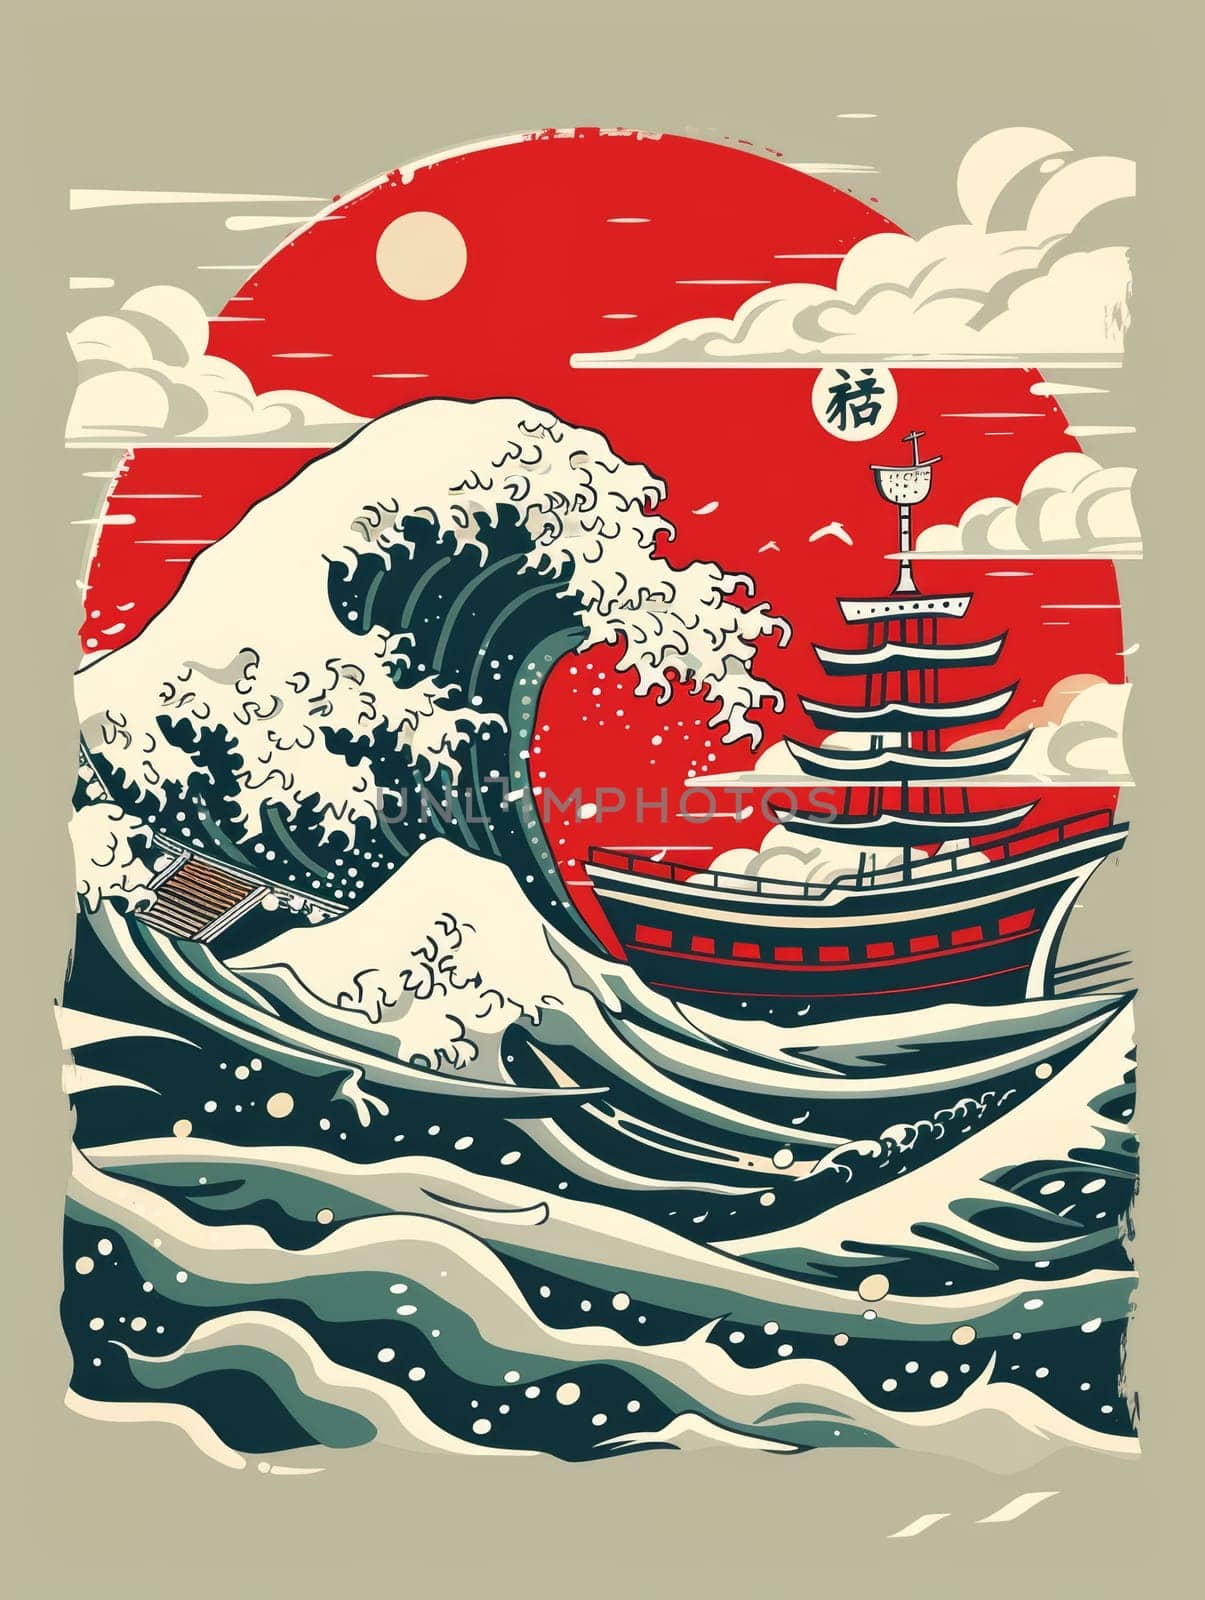 Graphic art of a pagoda silhouette against a backdrop of large waves and a bold red sun, embodying traditional Asian elements. by sfinks